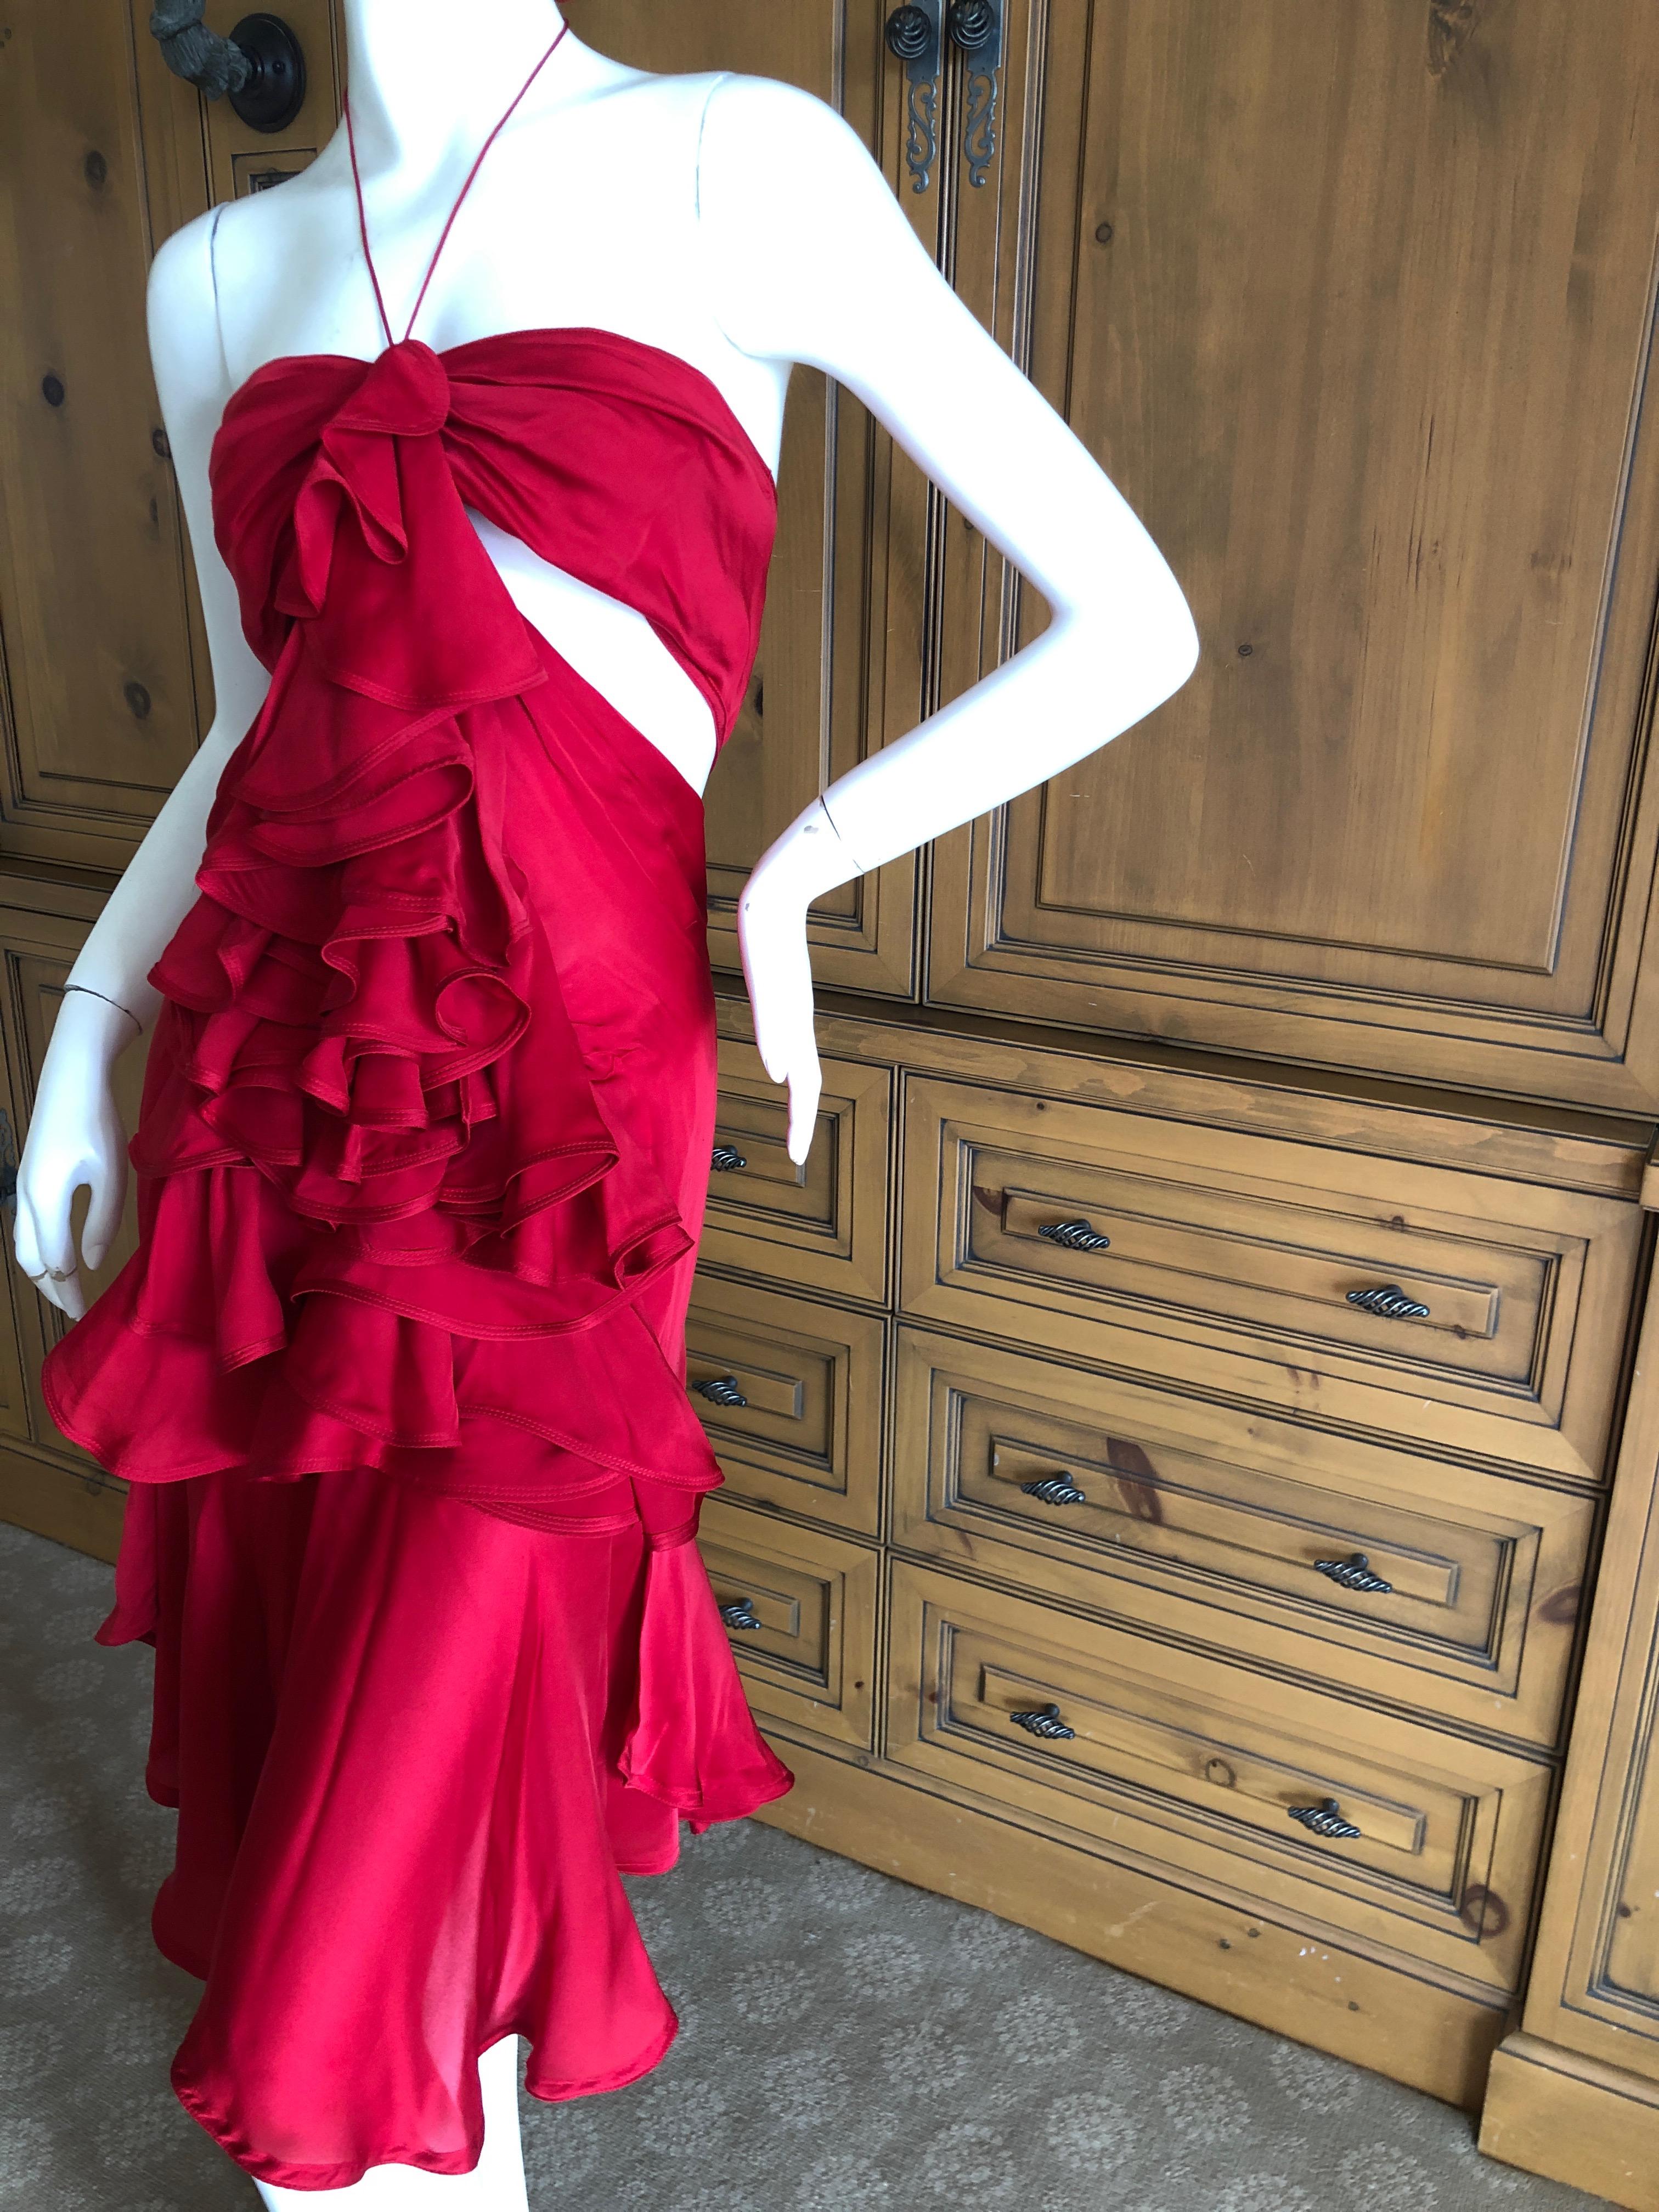 Women's Yves Saint Laurent by Tom Ford 2003 Ruffled Red Silk Dress Size 40 For Sale